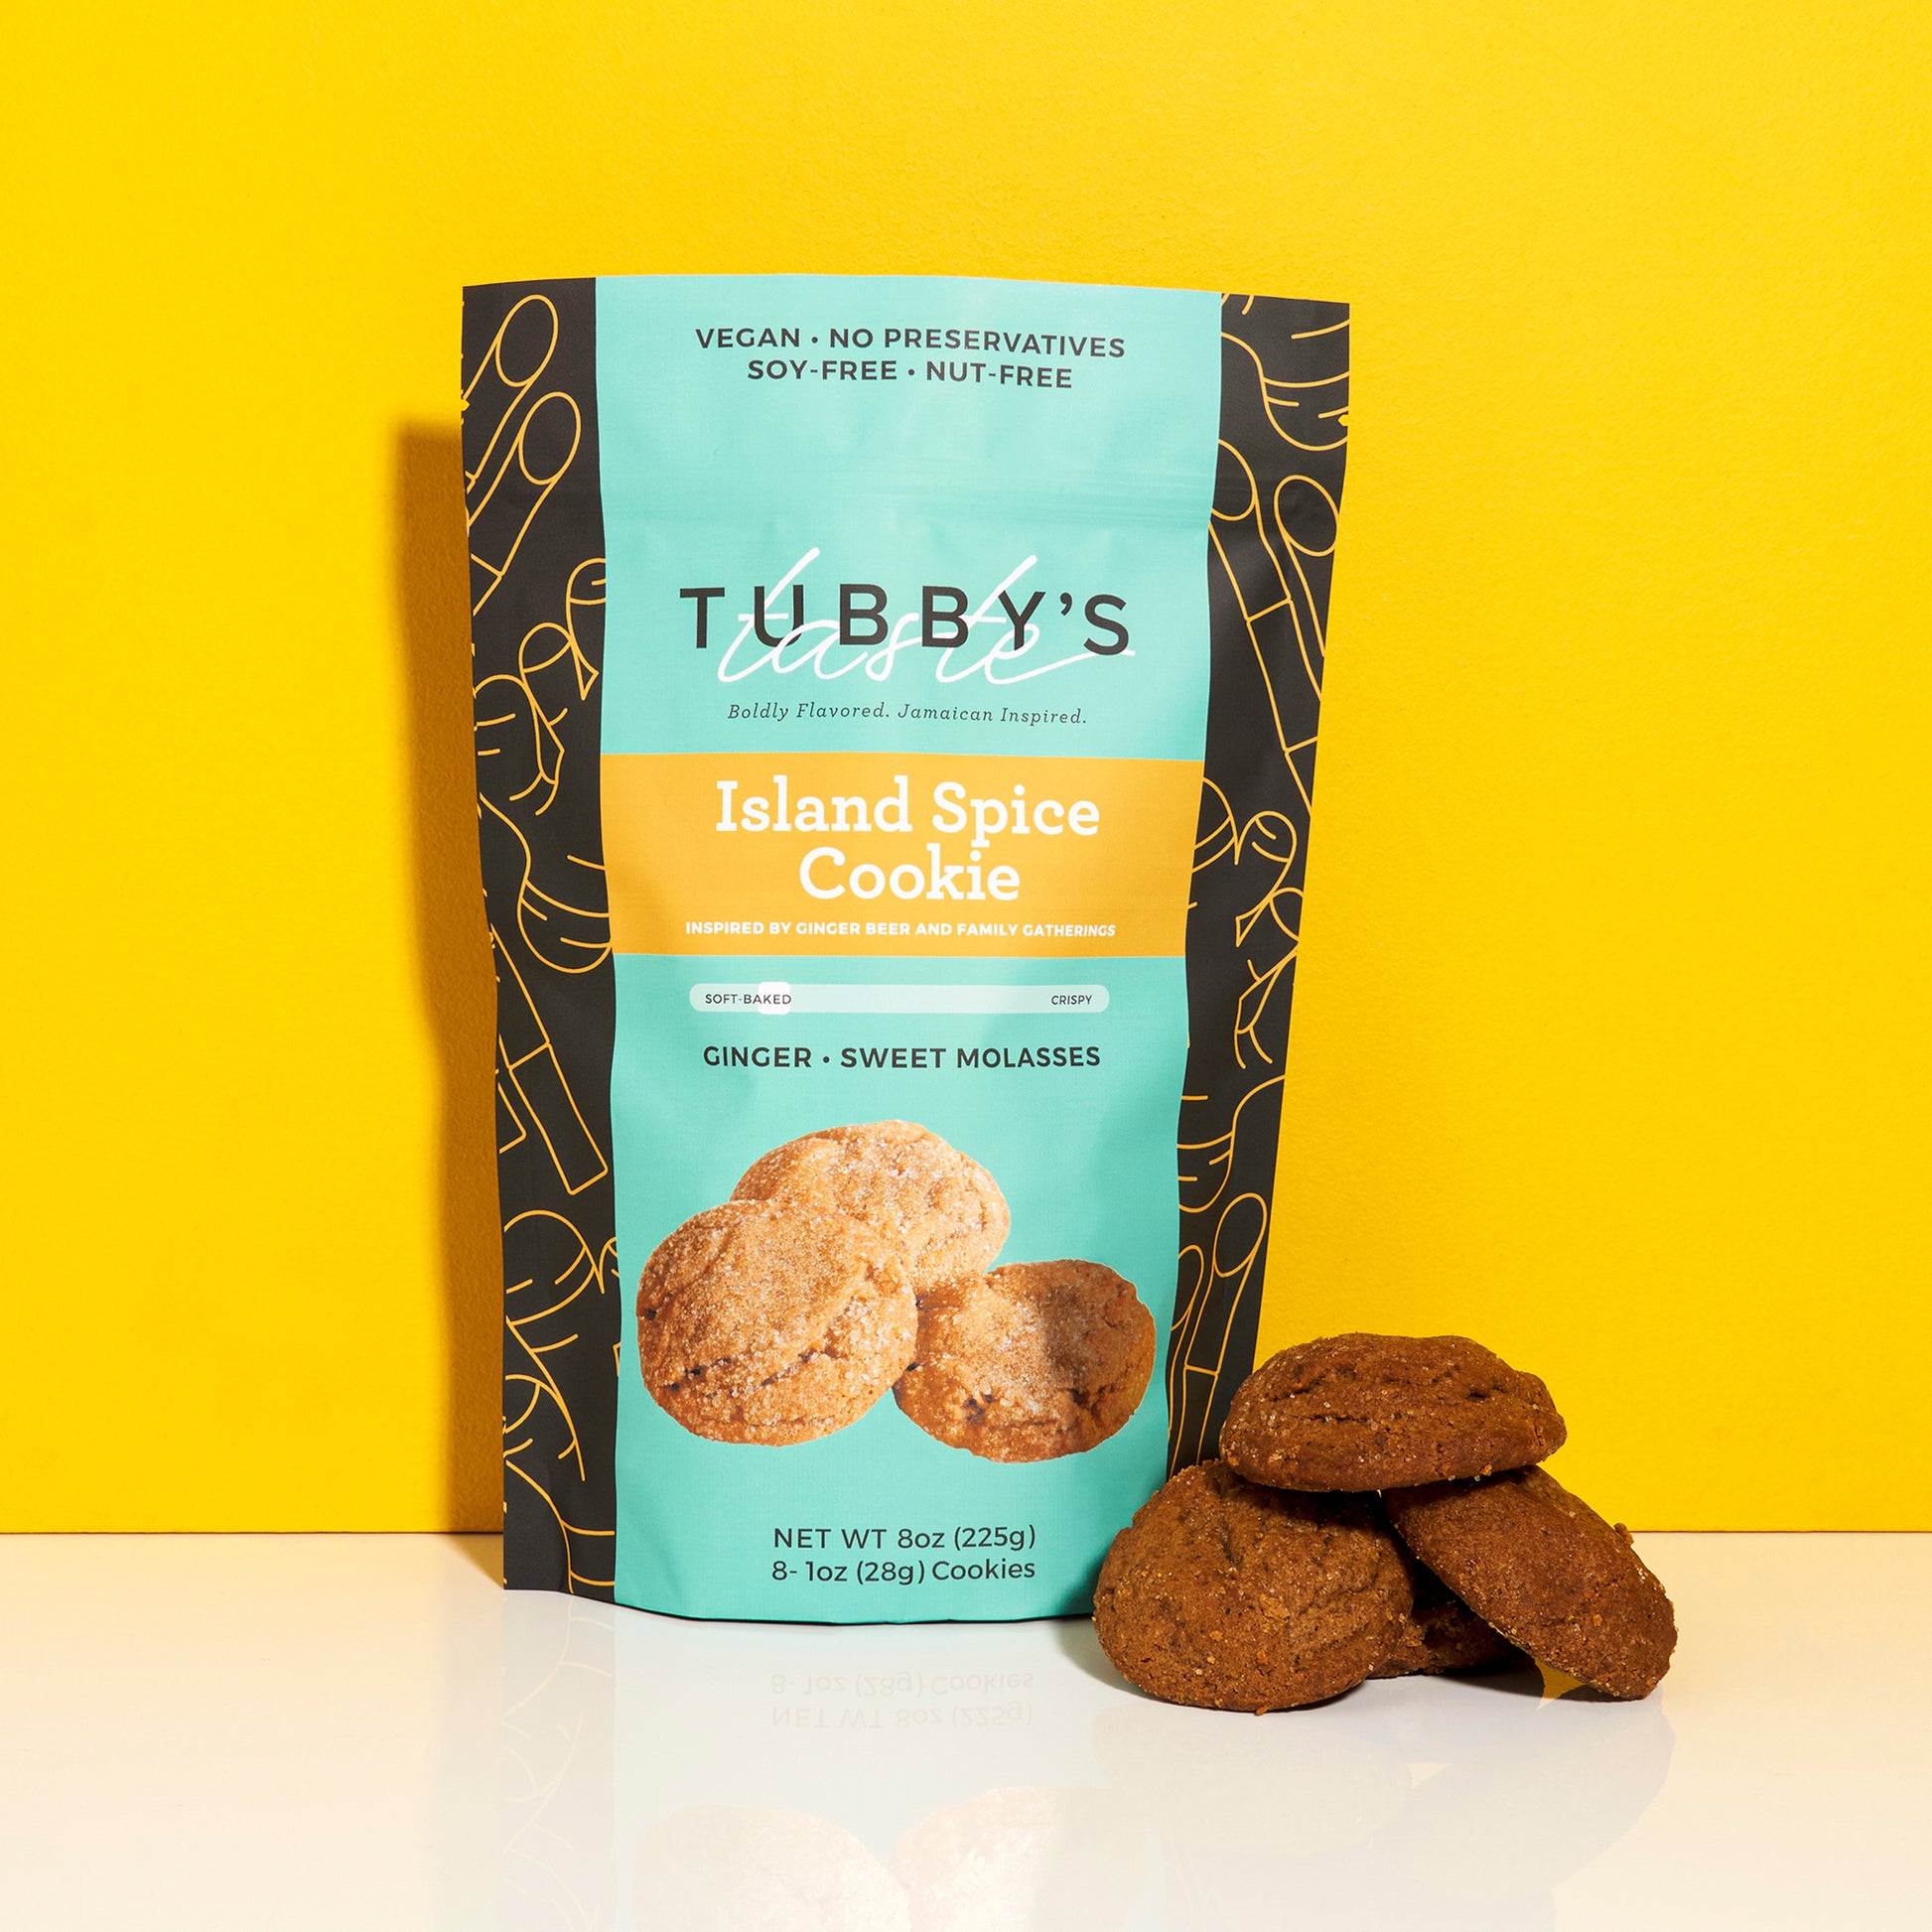 Four ginger molasses cookies with Tubby's Taste bag labeled Island Spice on a bright yellow and white backgorund.